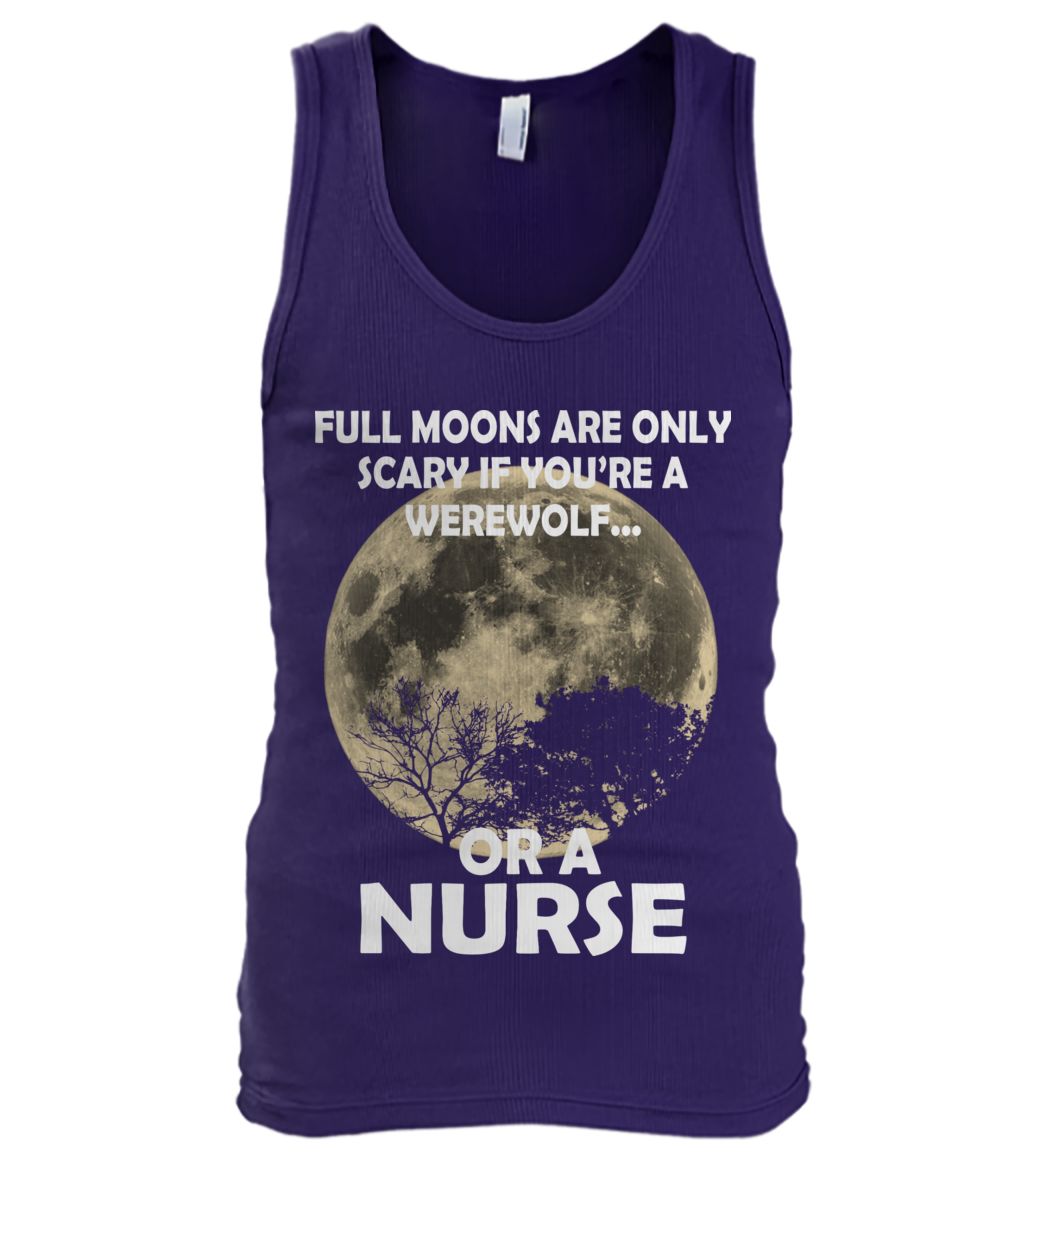 Full moons are only scary if you're a werewolf or a nurse men's tank top